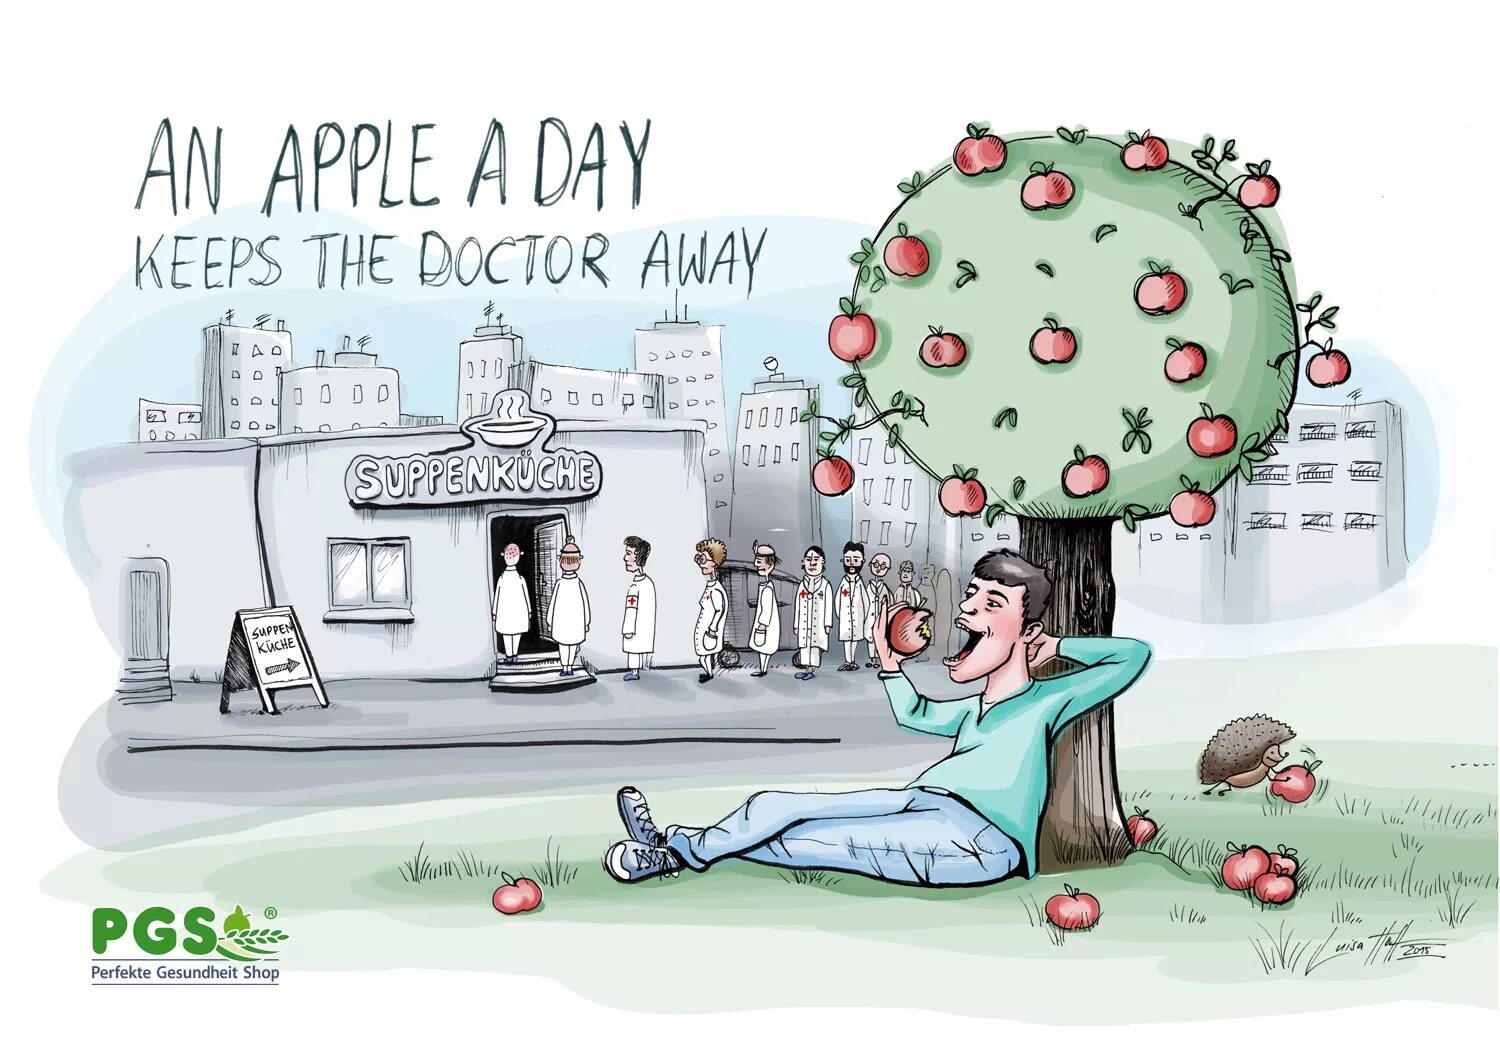 An a day keeps the doctor away. One Apple a Day keeps Doctors away. An Apple a Day keeps the Doctor away картинки. An Apple a Day keeps the Doctor away иллюстрация. An Apple a Day keeps the Doctor away идиома.